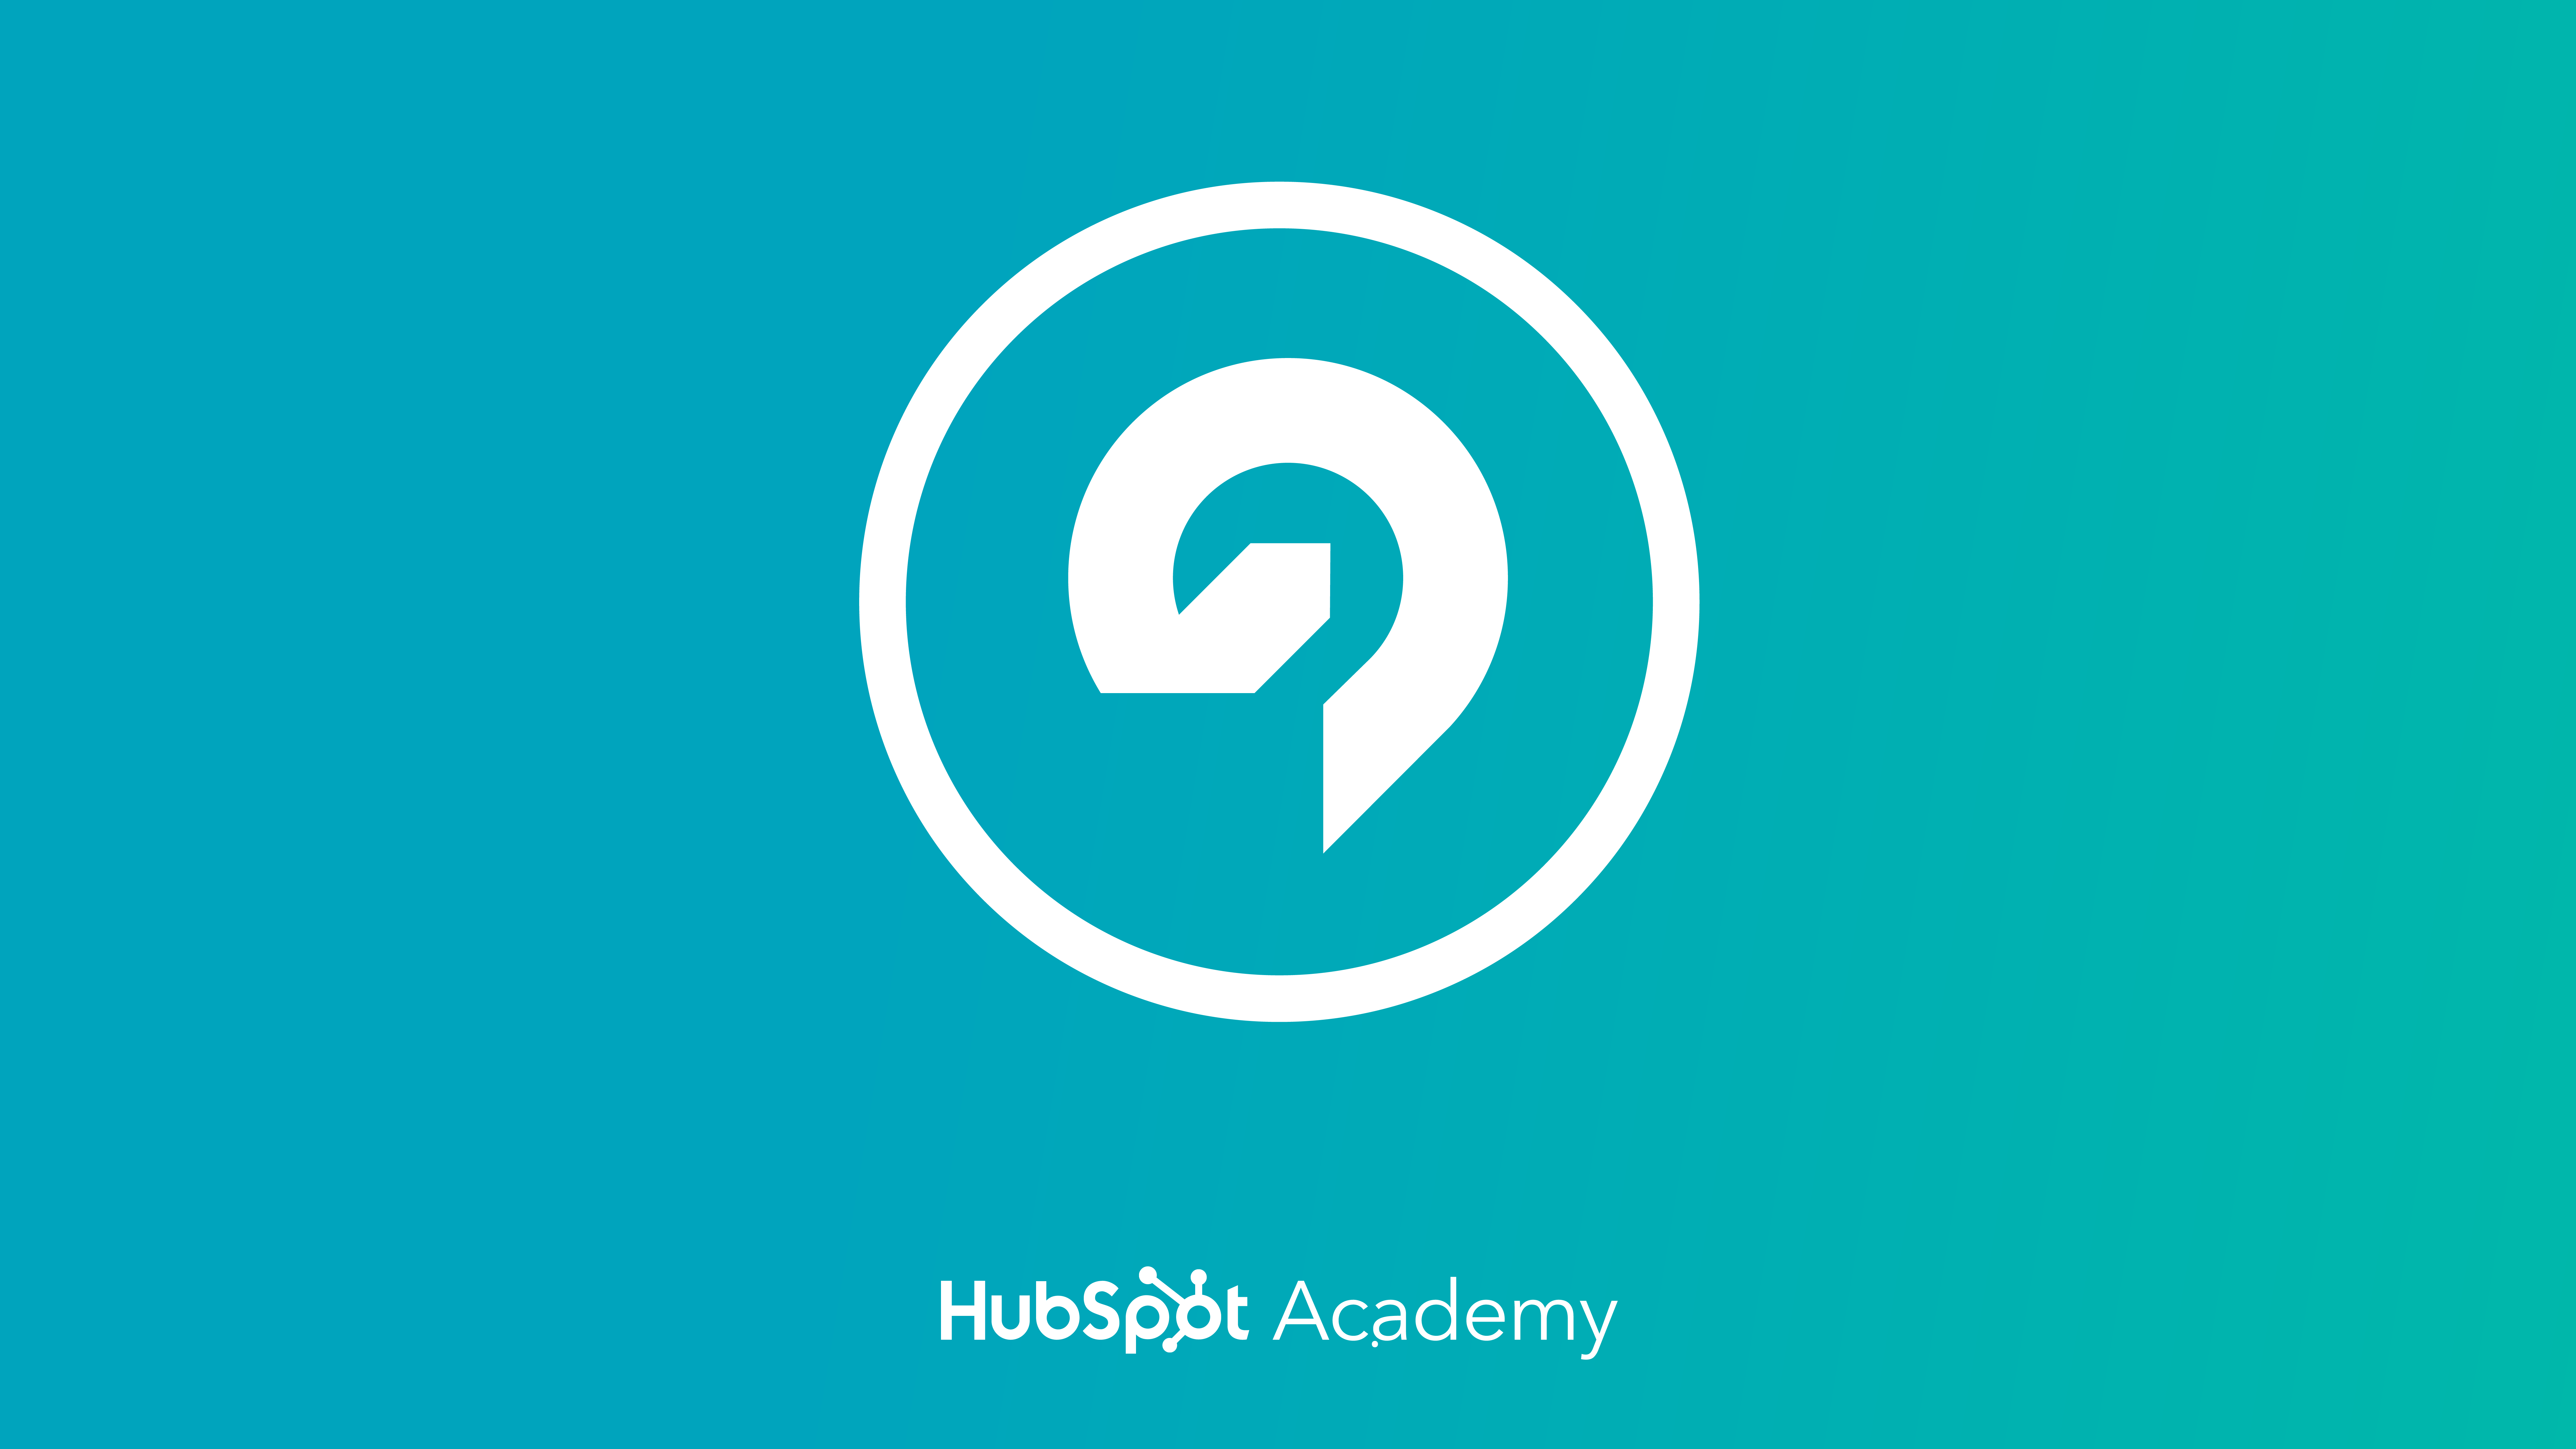 Free Agency Courses - HubSpot